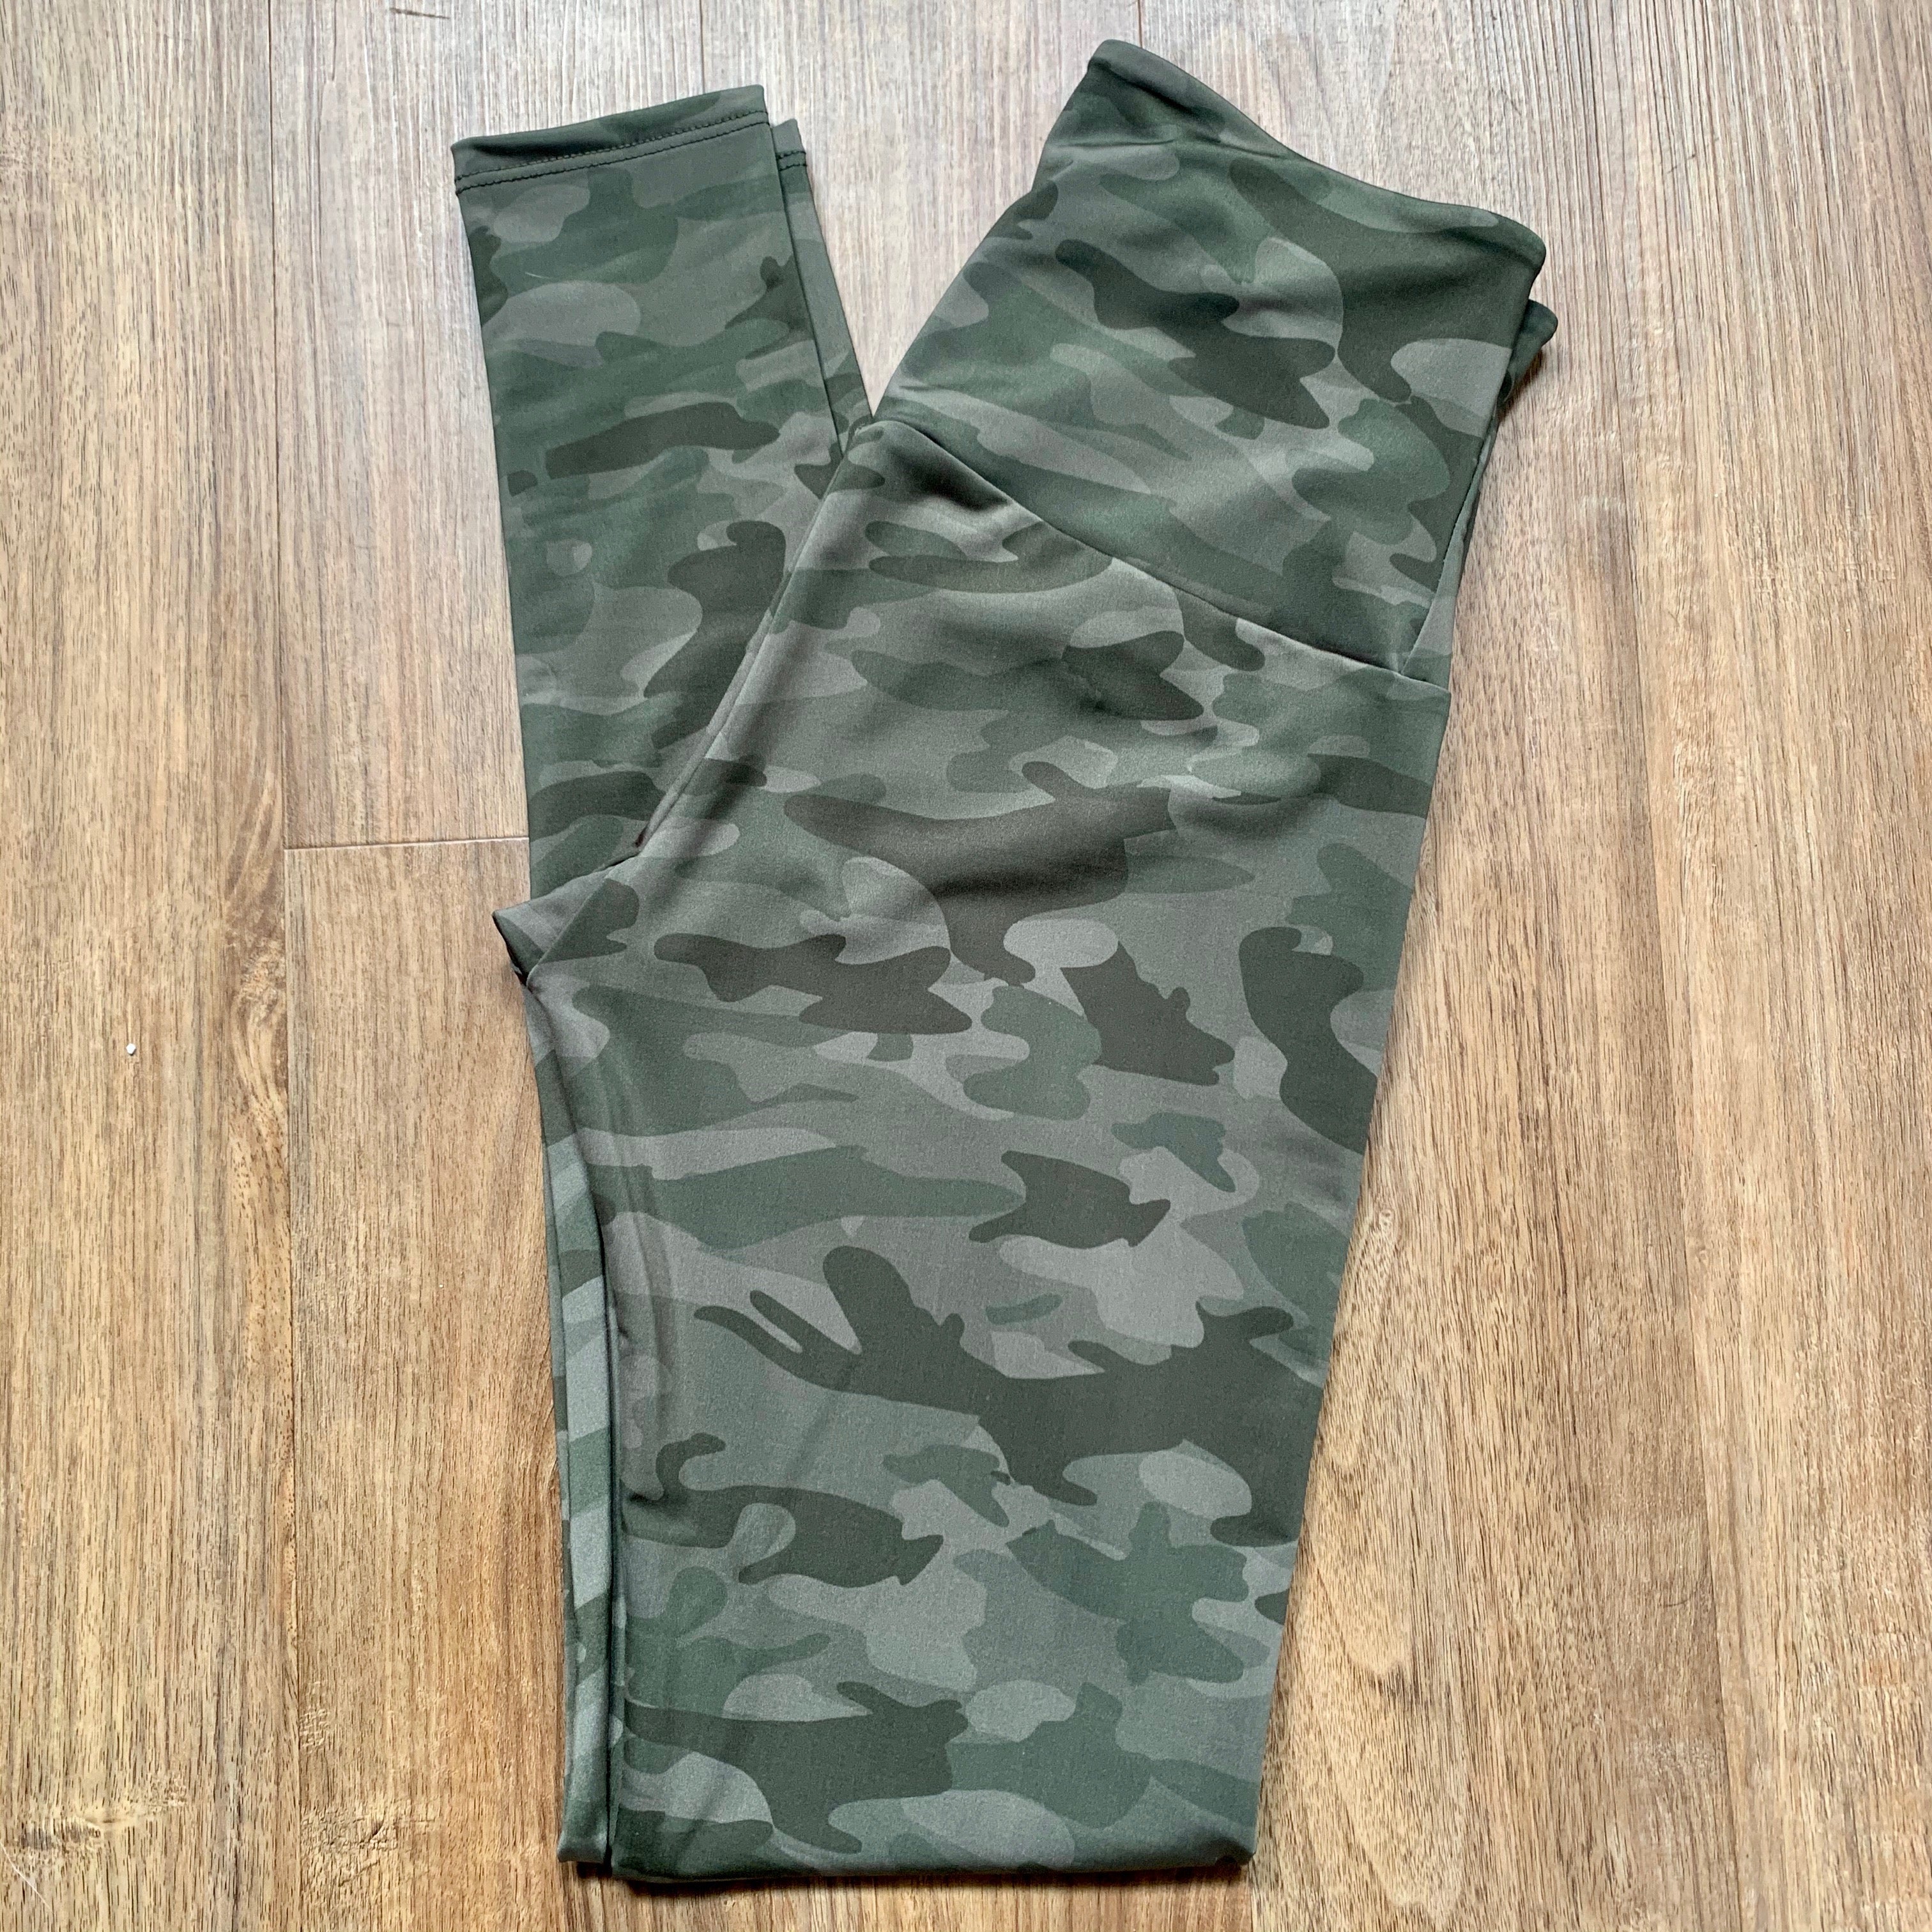 Green Camo Leggings for Women Army / Military Camouflage Pattern